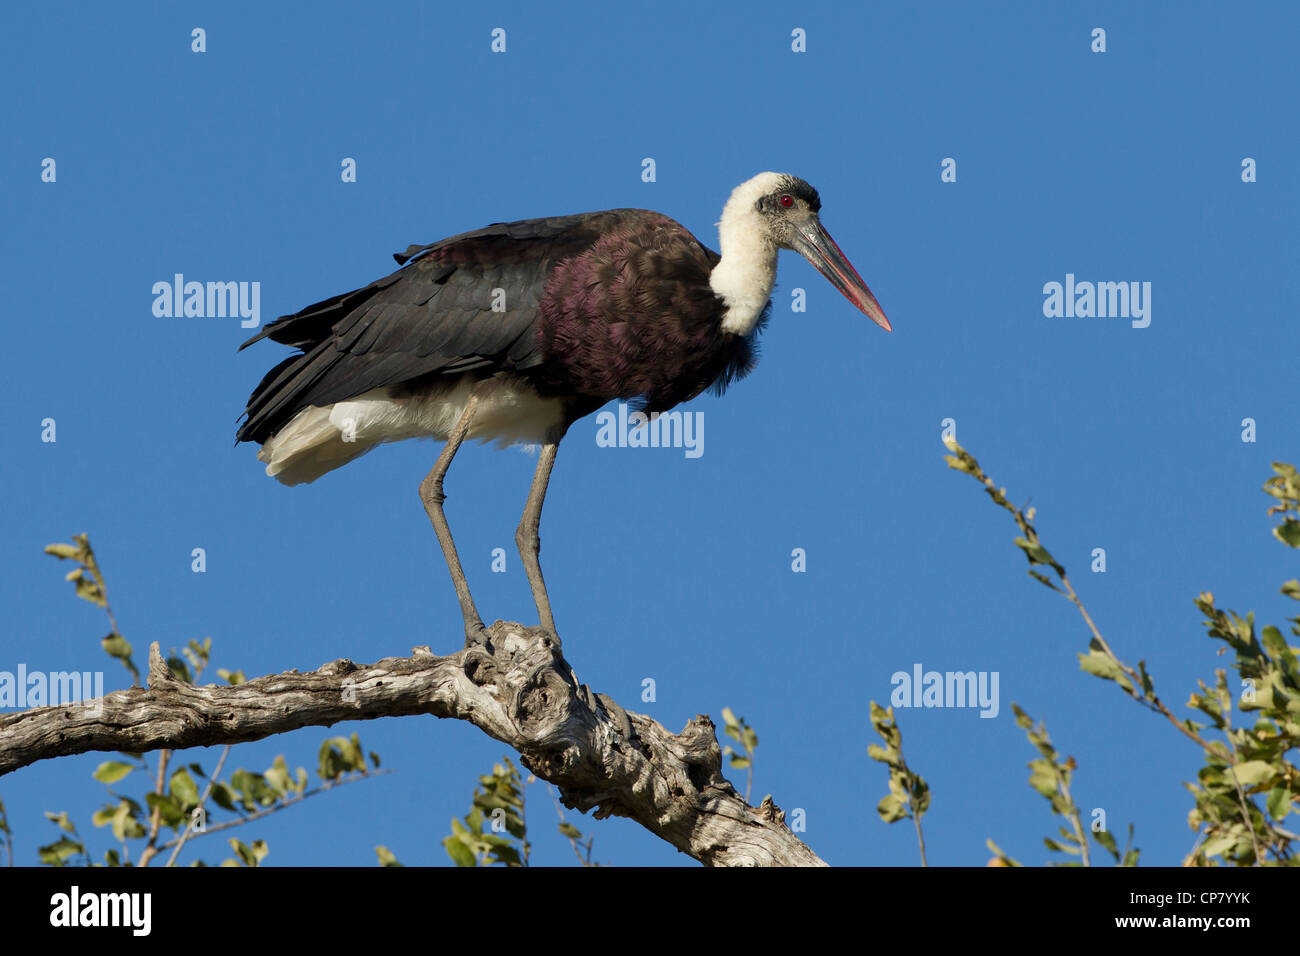 Wooly necked Stork, (Ciconia episcopus) perched on a branch in South Africa's Kruger Park Stock Photo